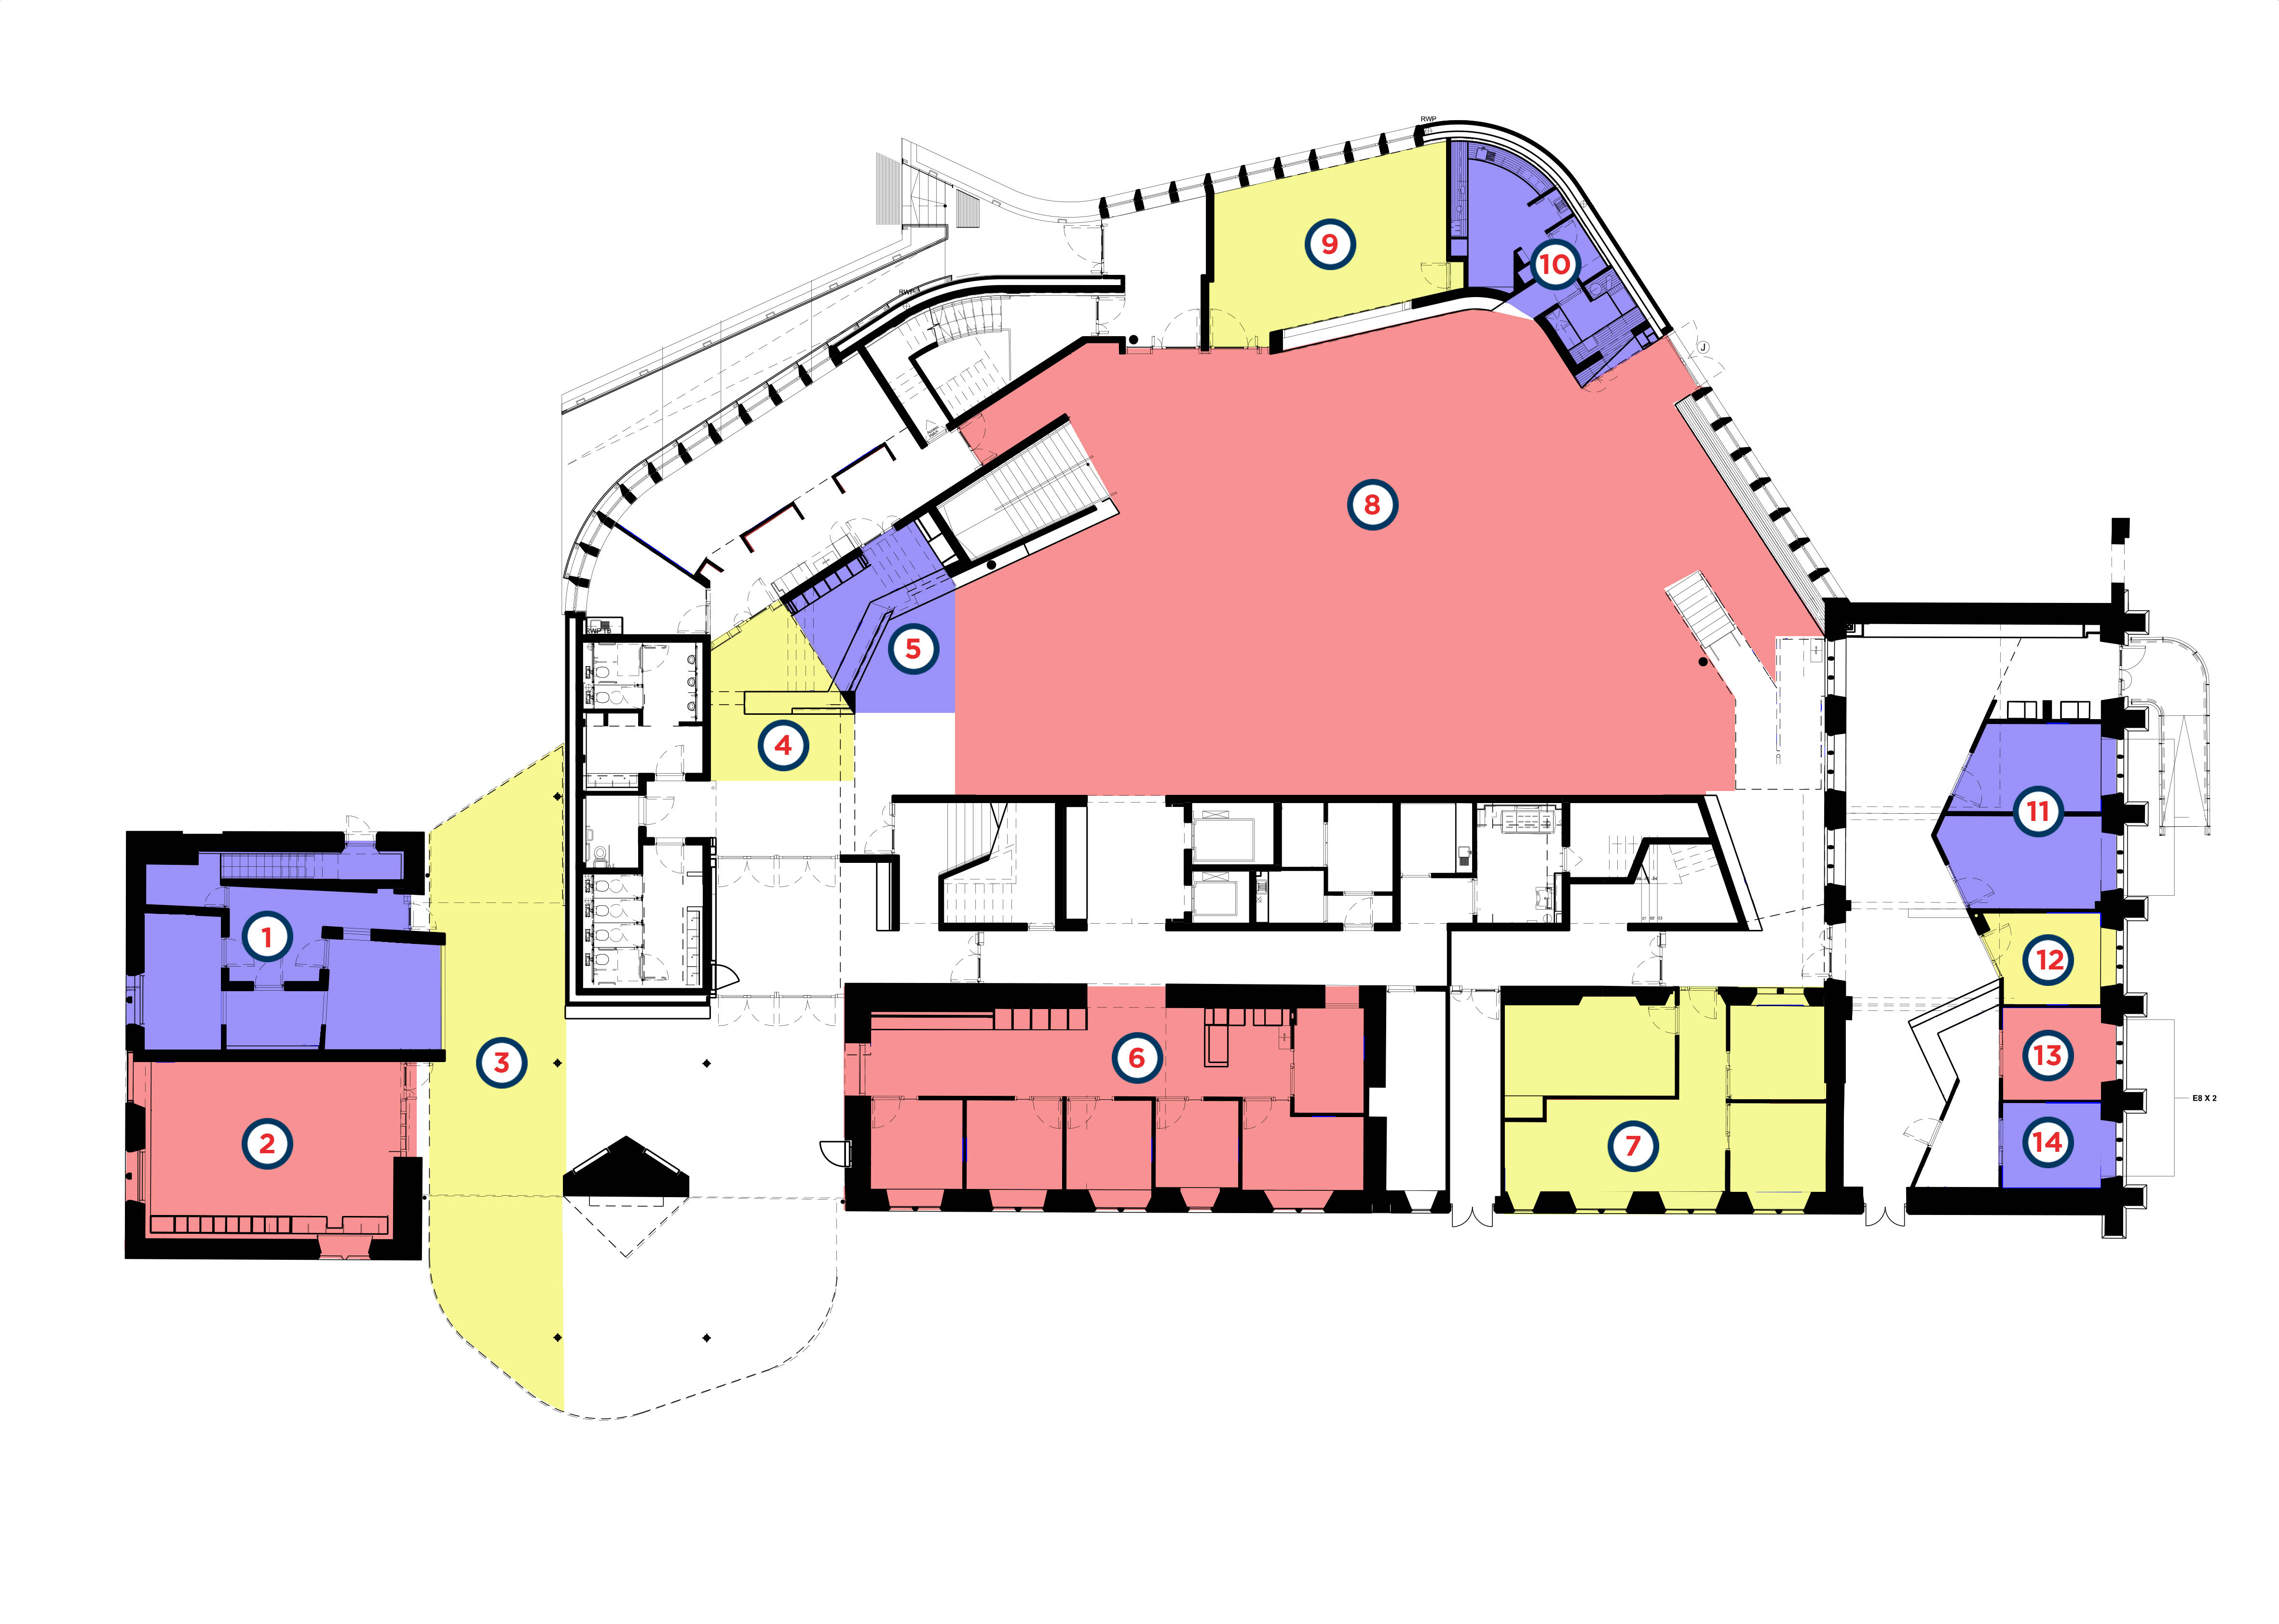 Ground floor layout plans of the Hub